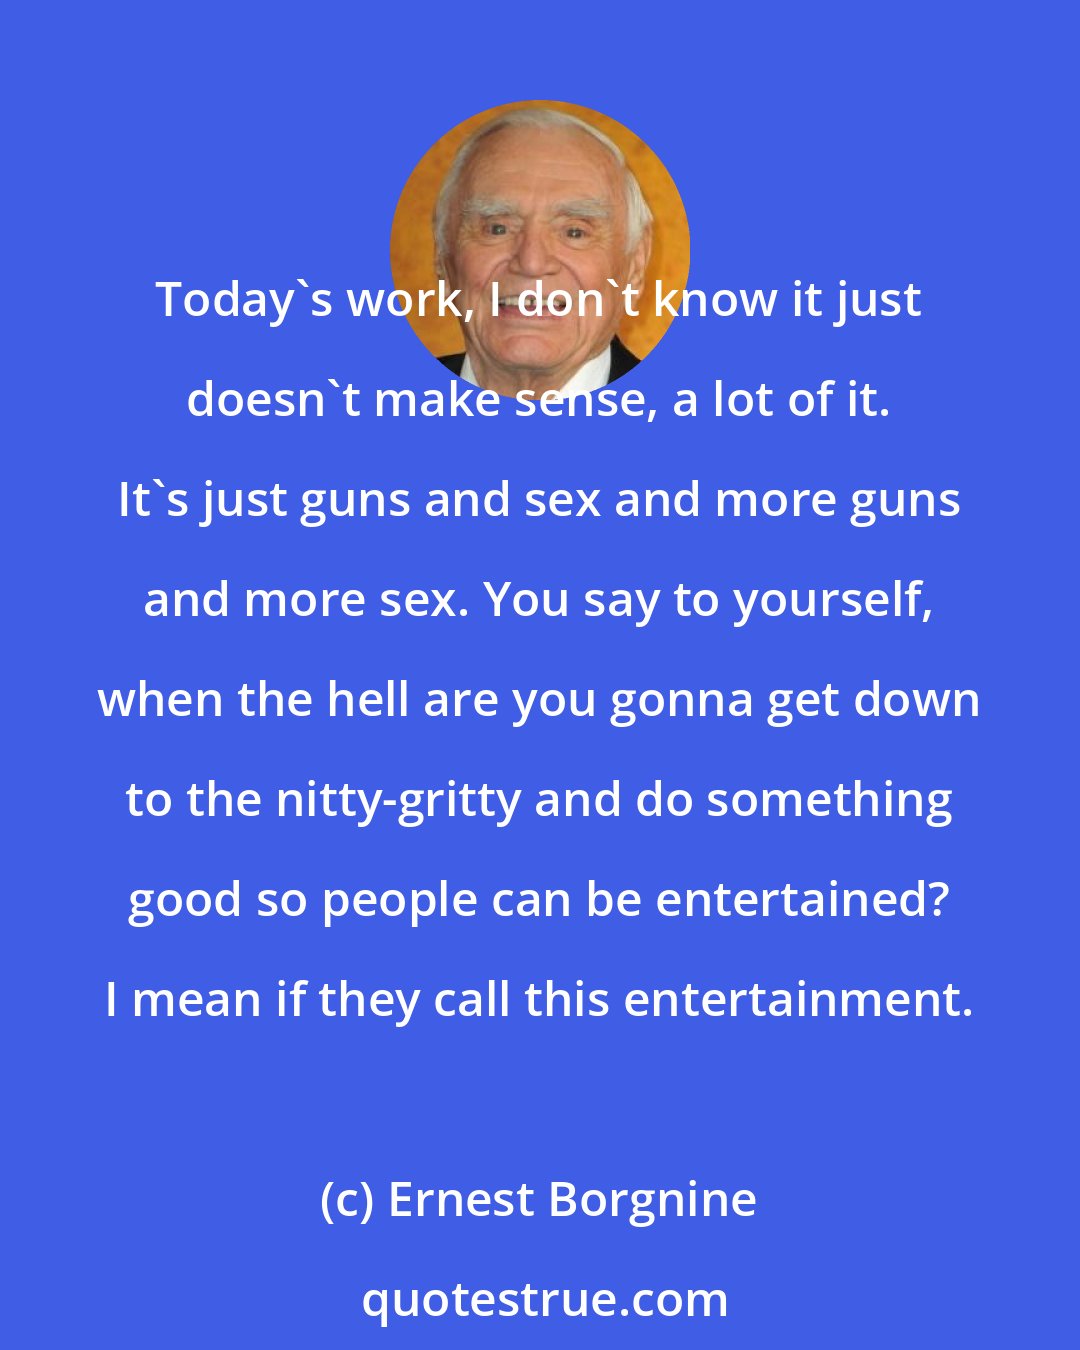 Ernest Borgnine: Today's work, I don't know it just doesn't make sense, a lot of it. It's just guns and sex and more guns and more sex. You say to yourself, when the hell are you gonna get down to the nitty-gritty and do something good so people can be entertained? I mean if they call this entertainment.